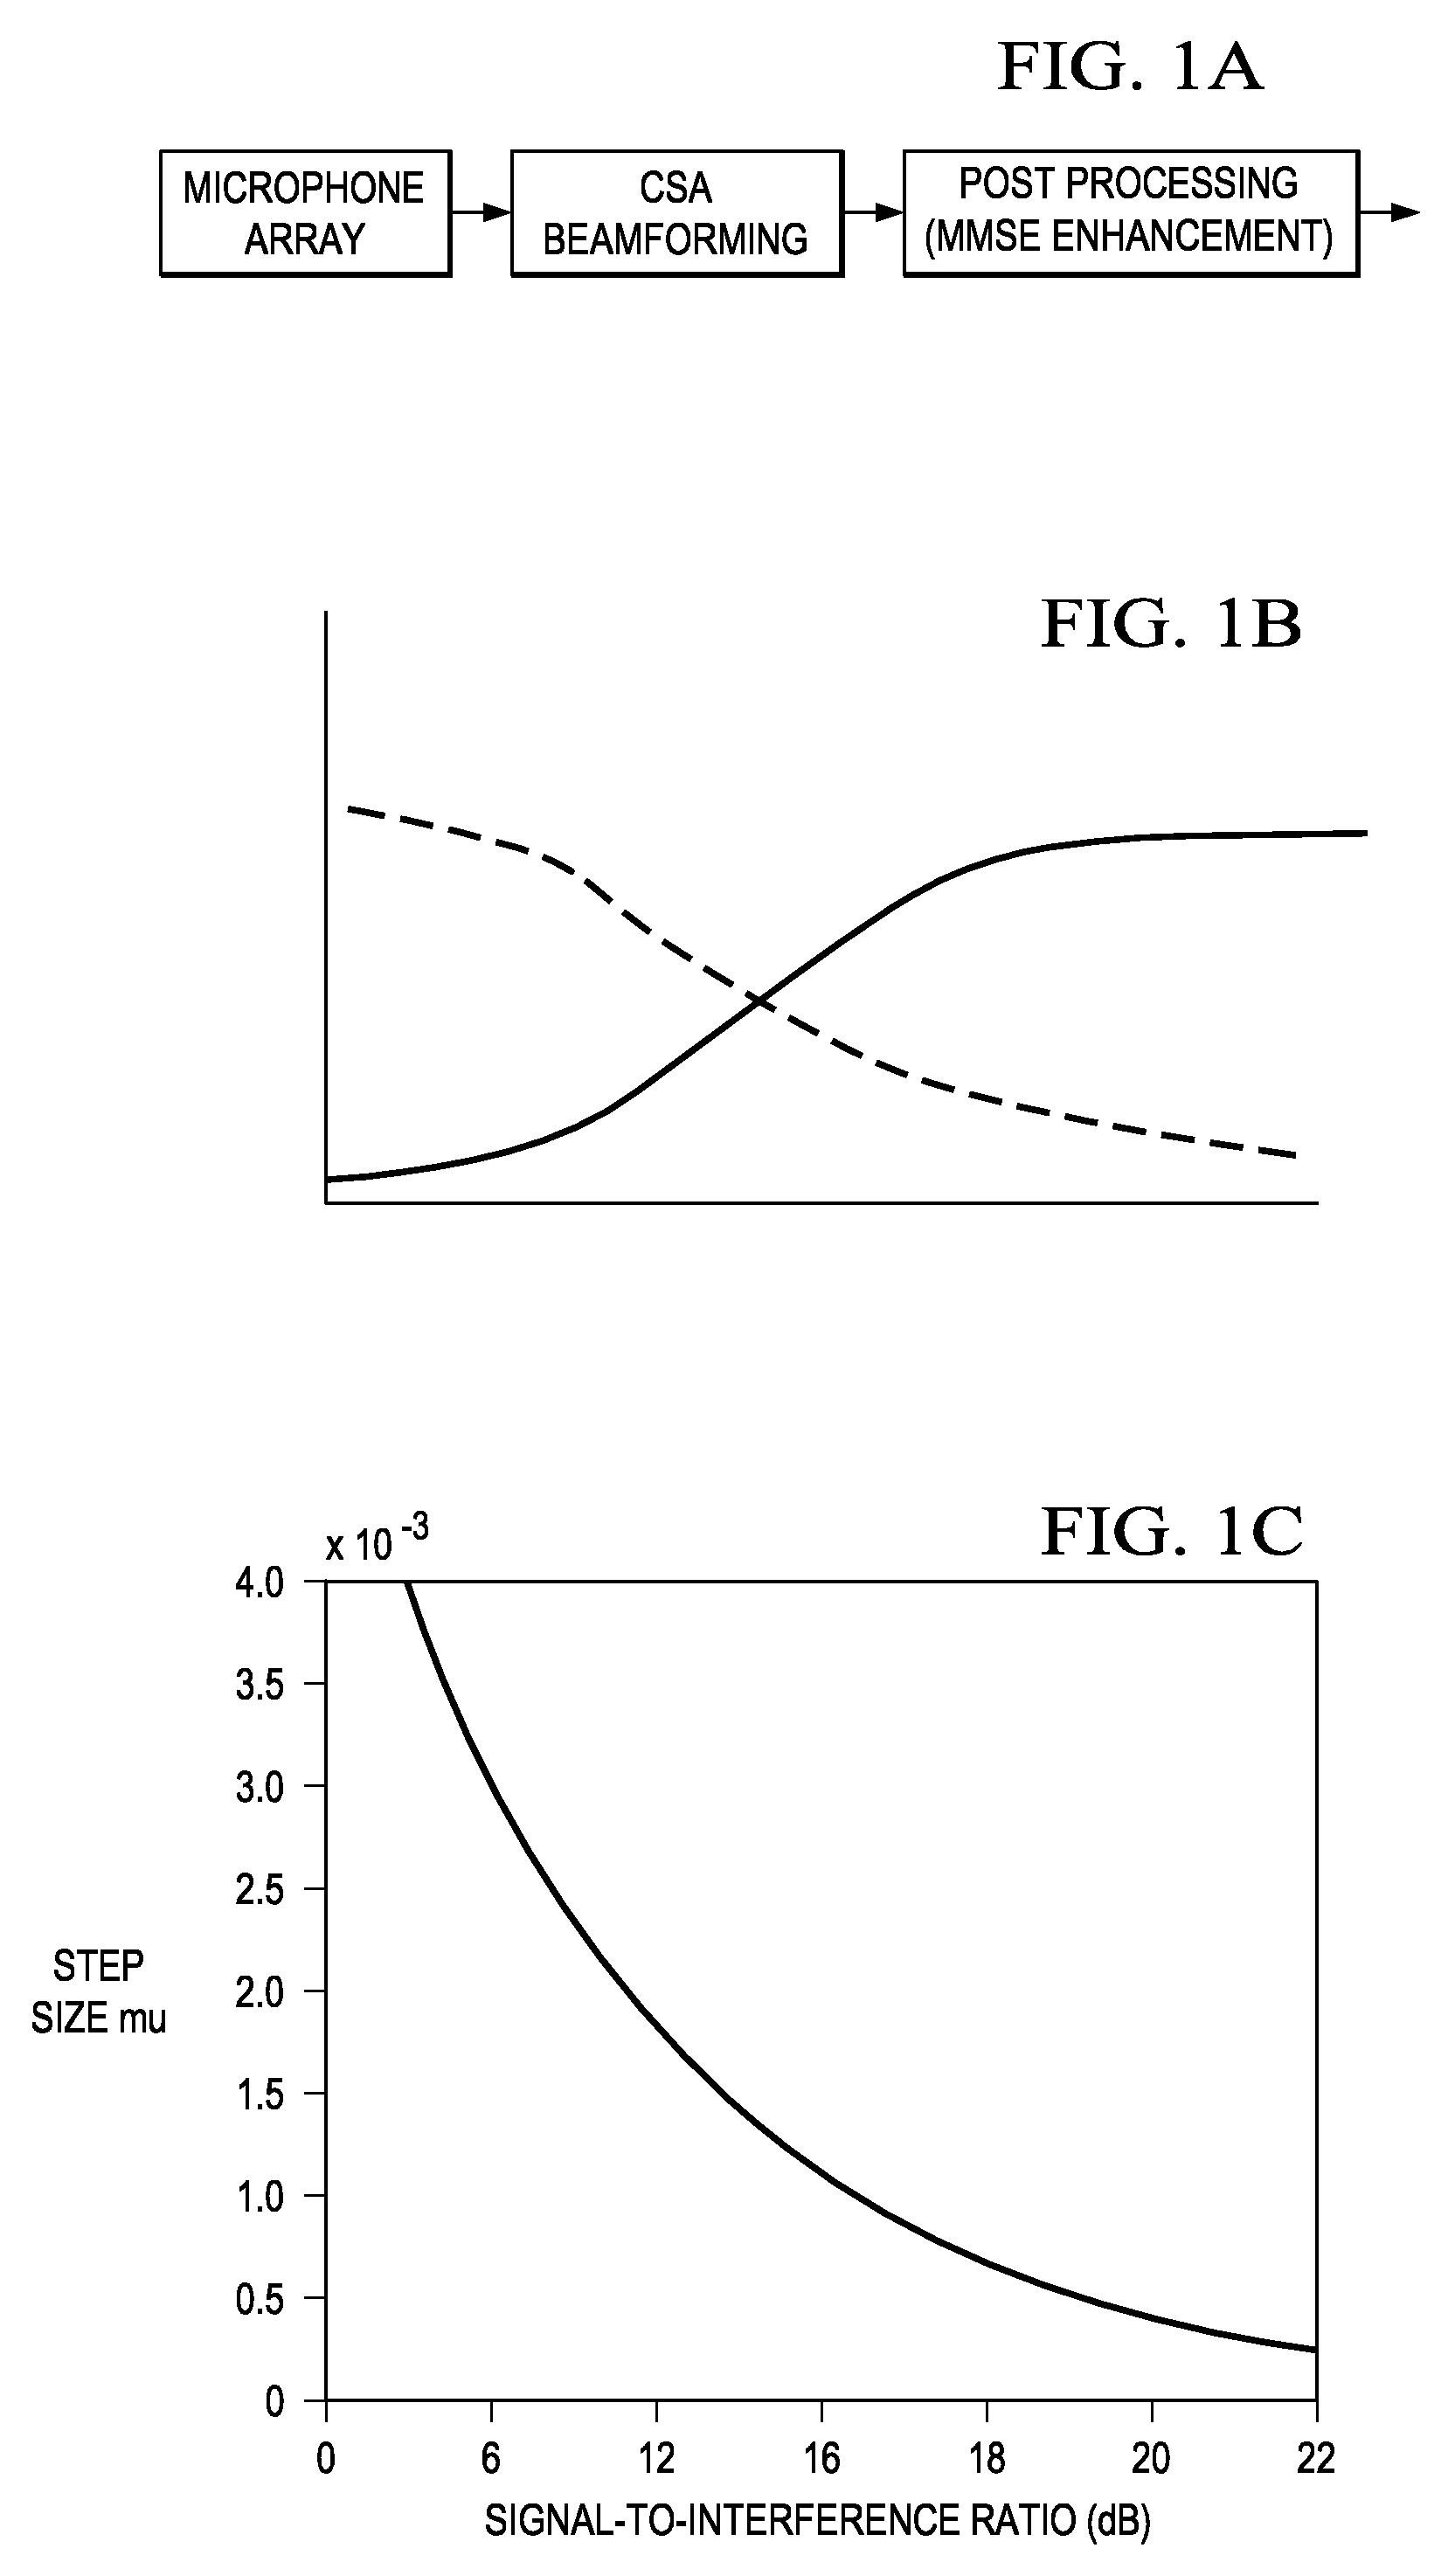 Constrainted switched adaptive beamforming